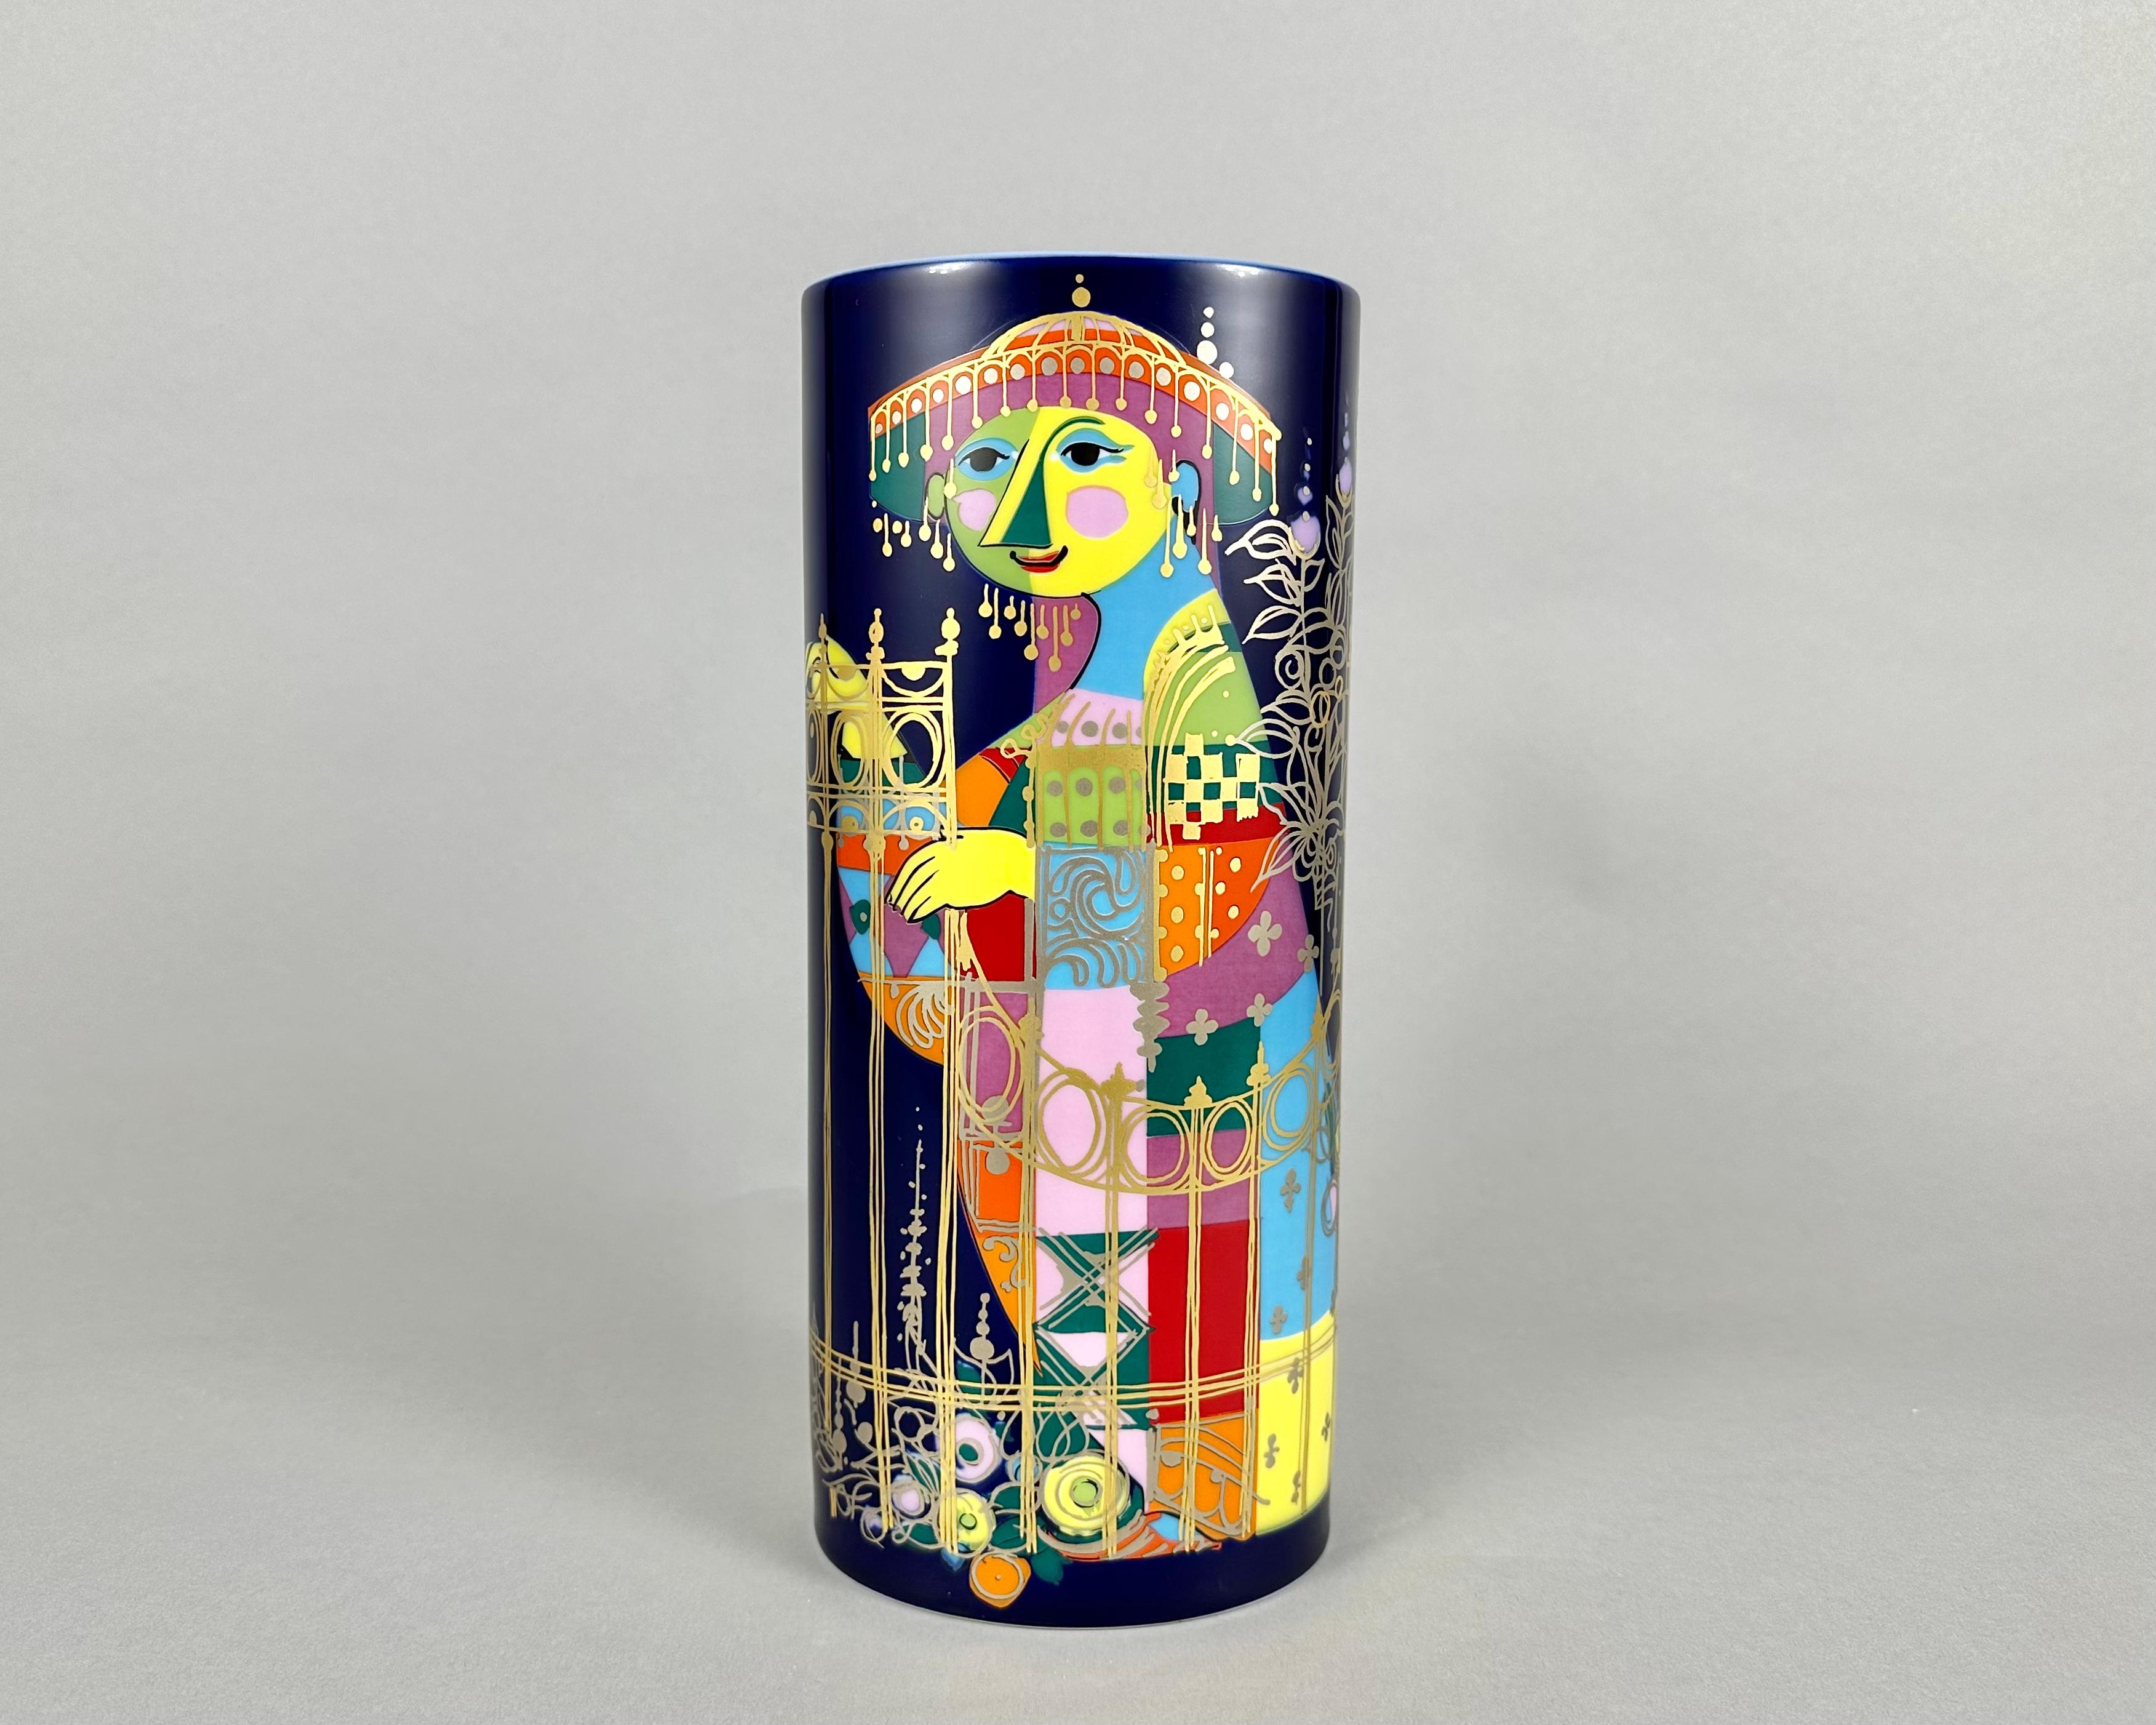 Unique vintage vase by Björn Wiinblad for German Rosenthal from the series 1001 nights tails. 1972.

Signed on the bottom.

The hand paint is in an art deco style and is abstract in its' patterns. 

The vase will delight the owners with its